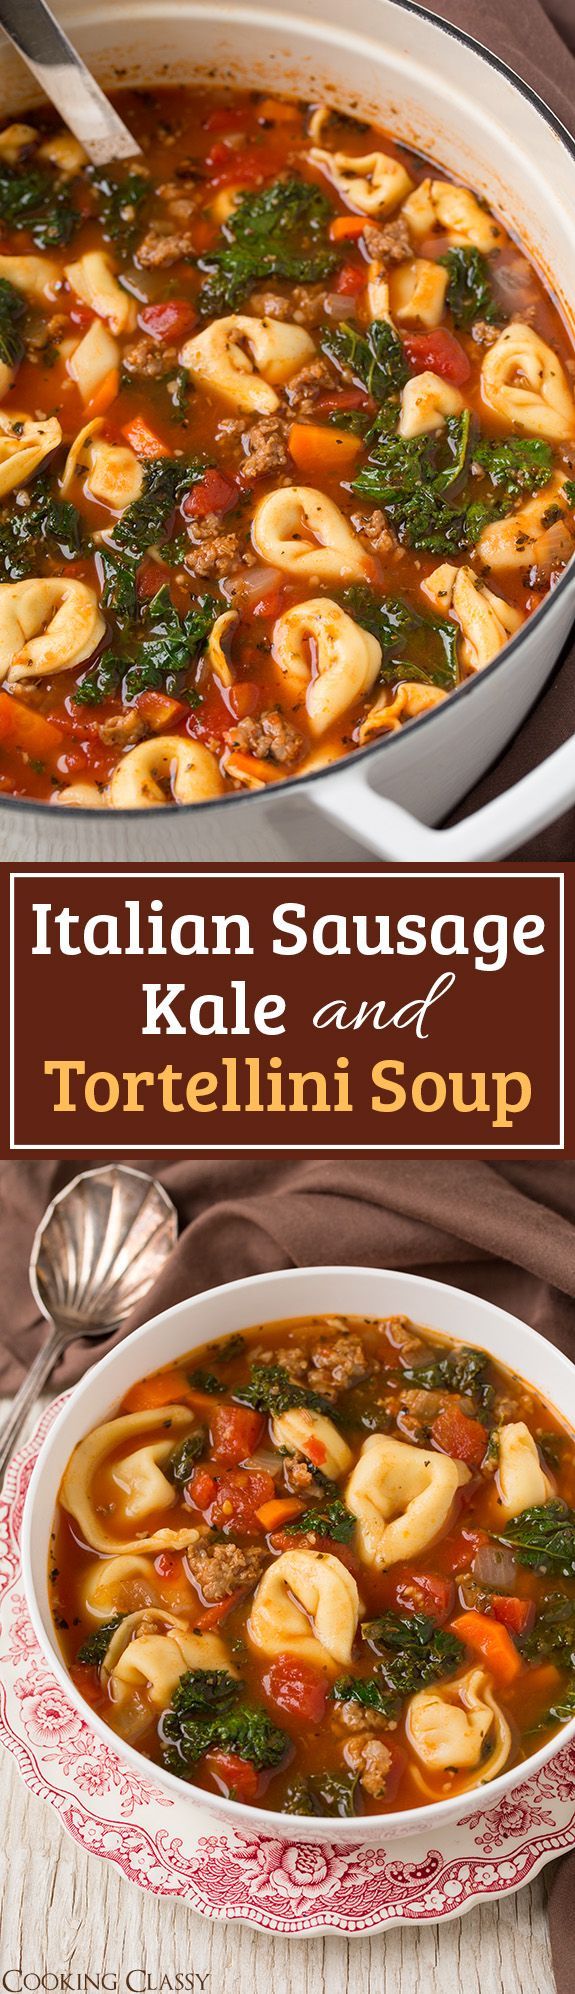 Italian Sausage, Kale and Tortellini Soup – easy, hearty and loved the flavor! Perfect for cold weathe